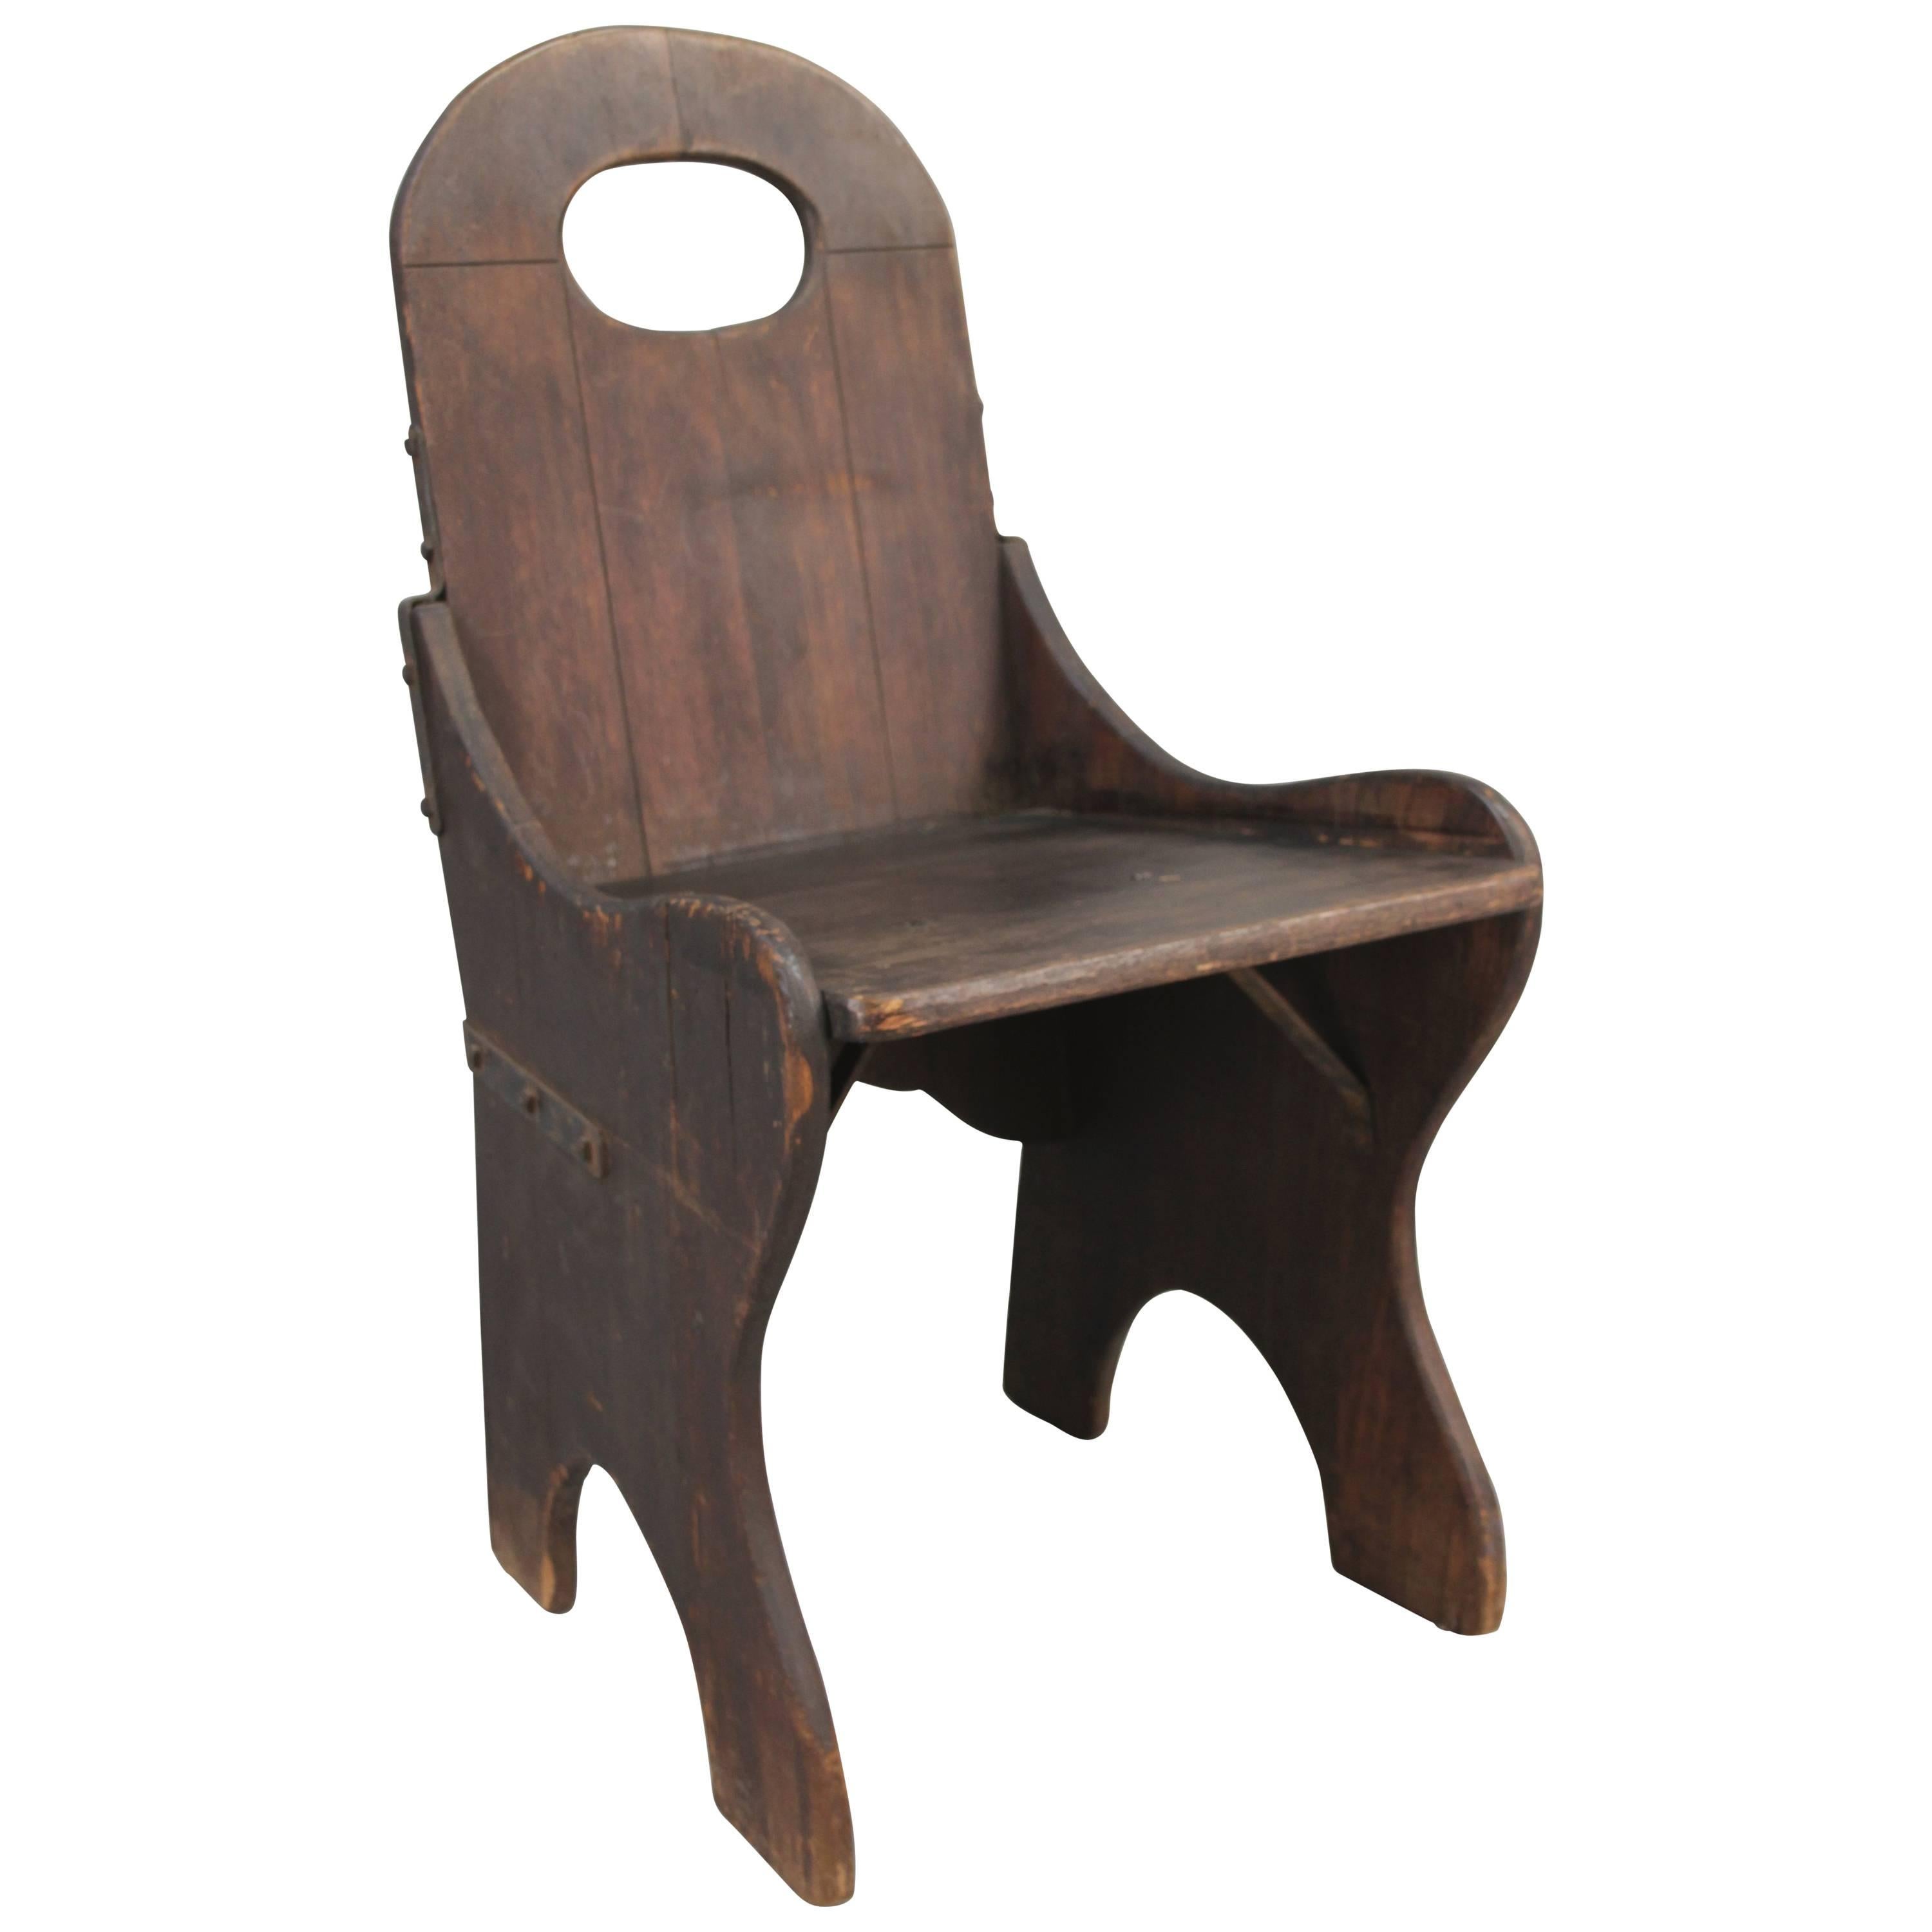 1930s Monterey Monks Chair in All Original Old Wood Finish